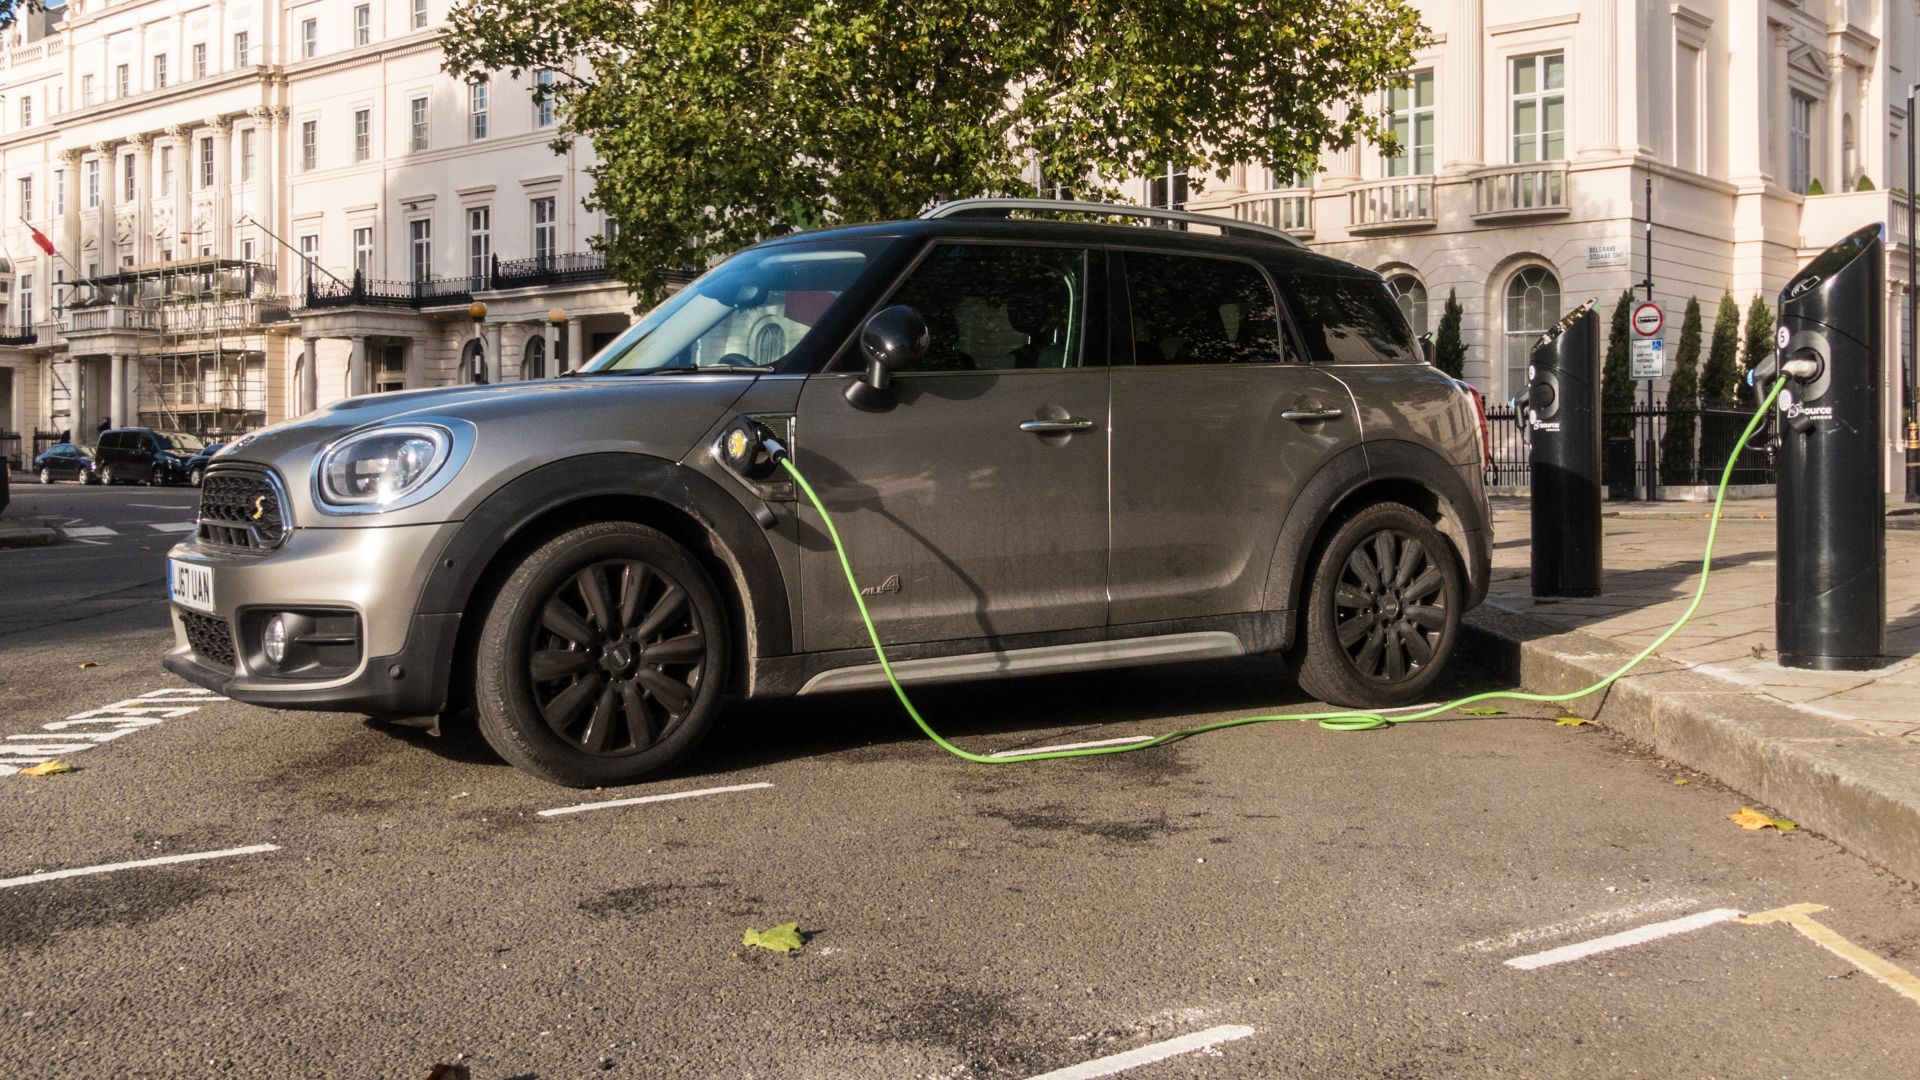 Government investment in car charging